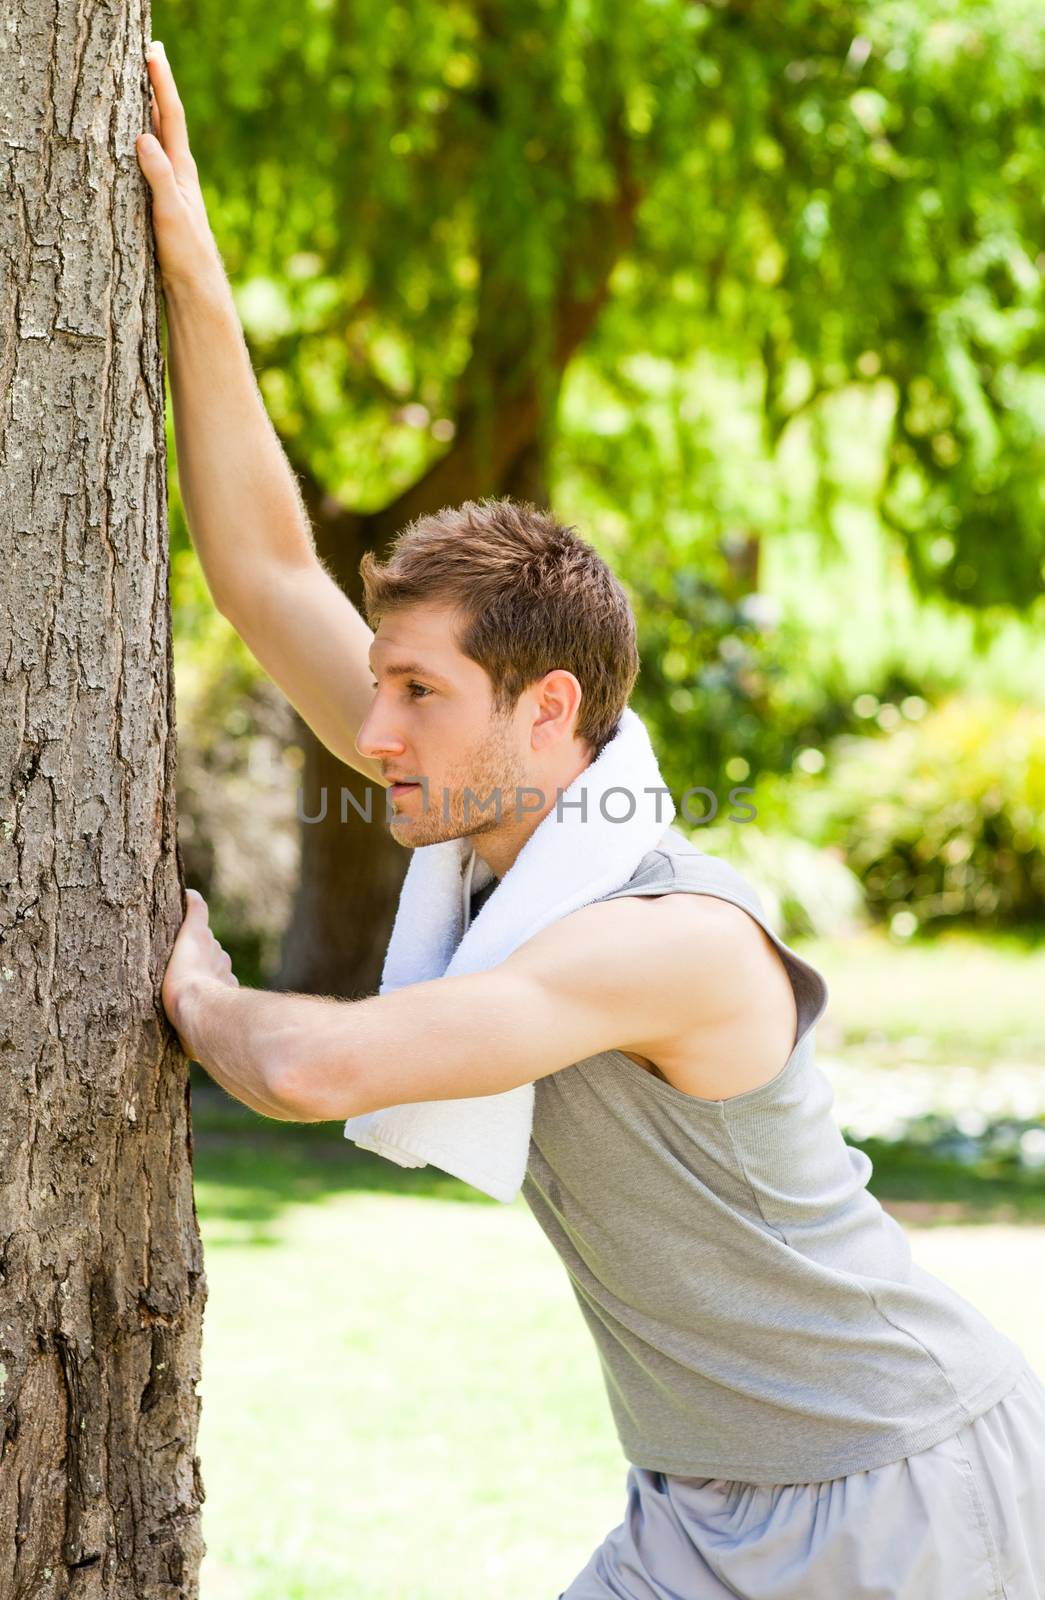 Man doing his stretches in the park during the summer